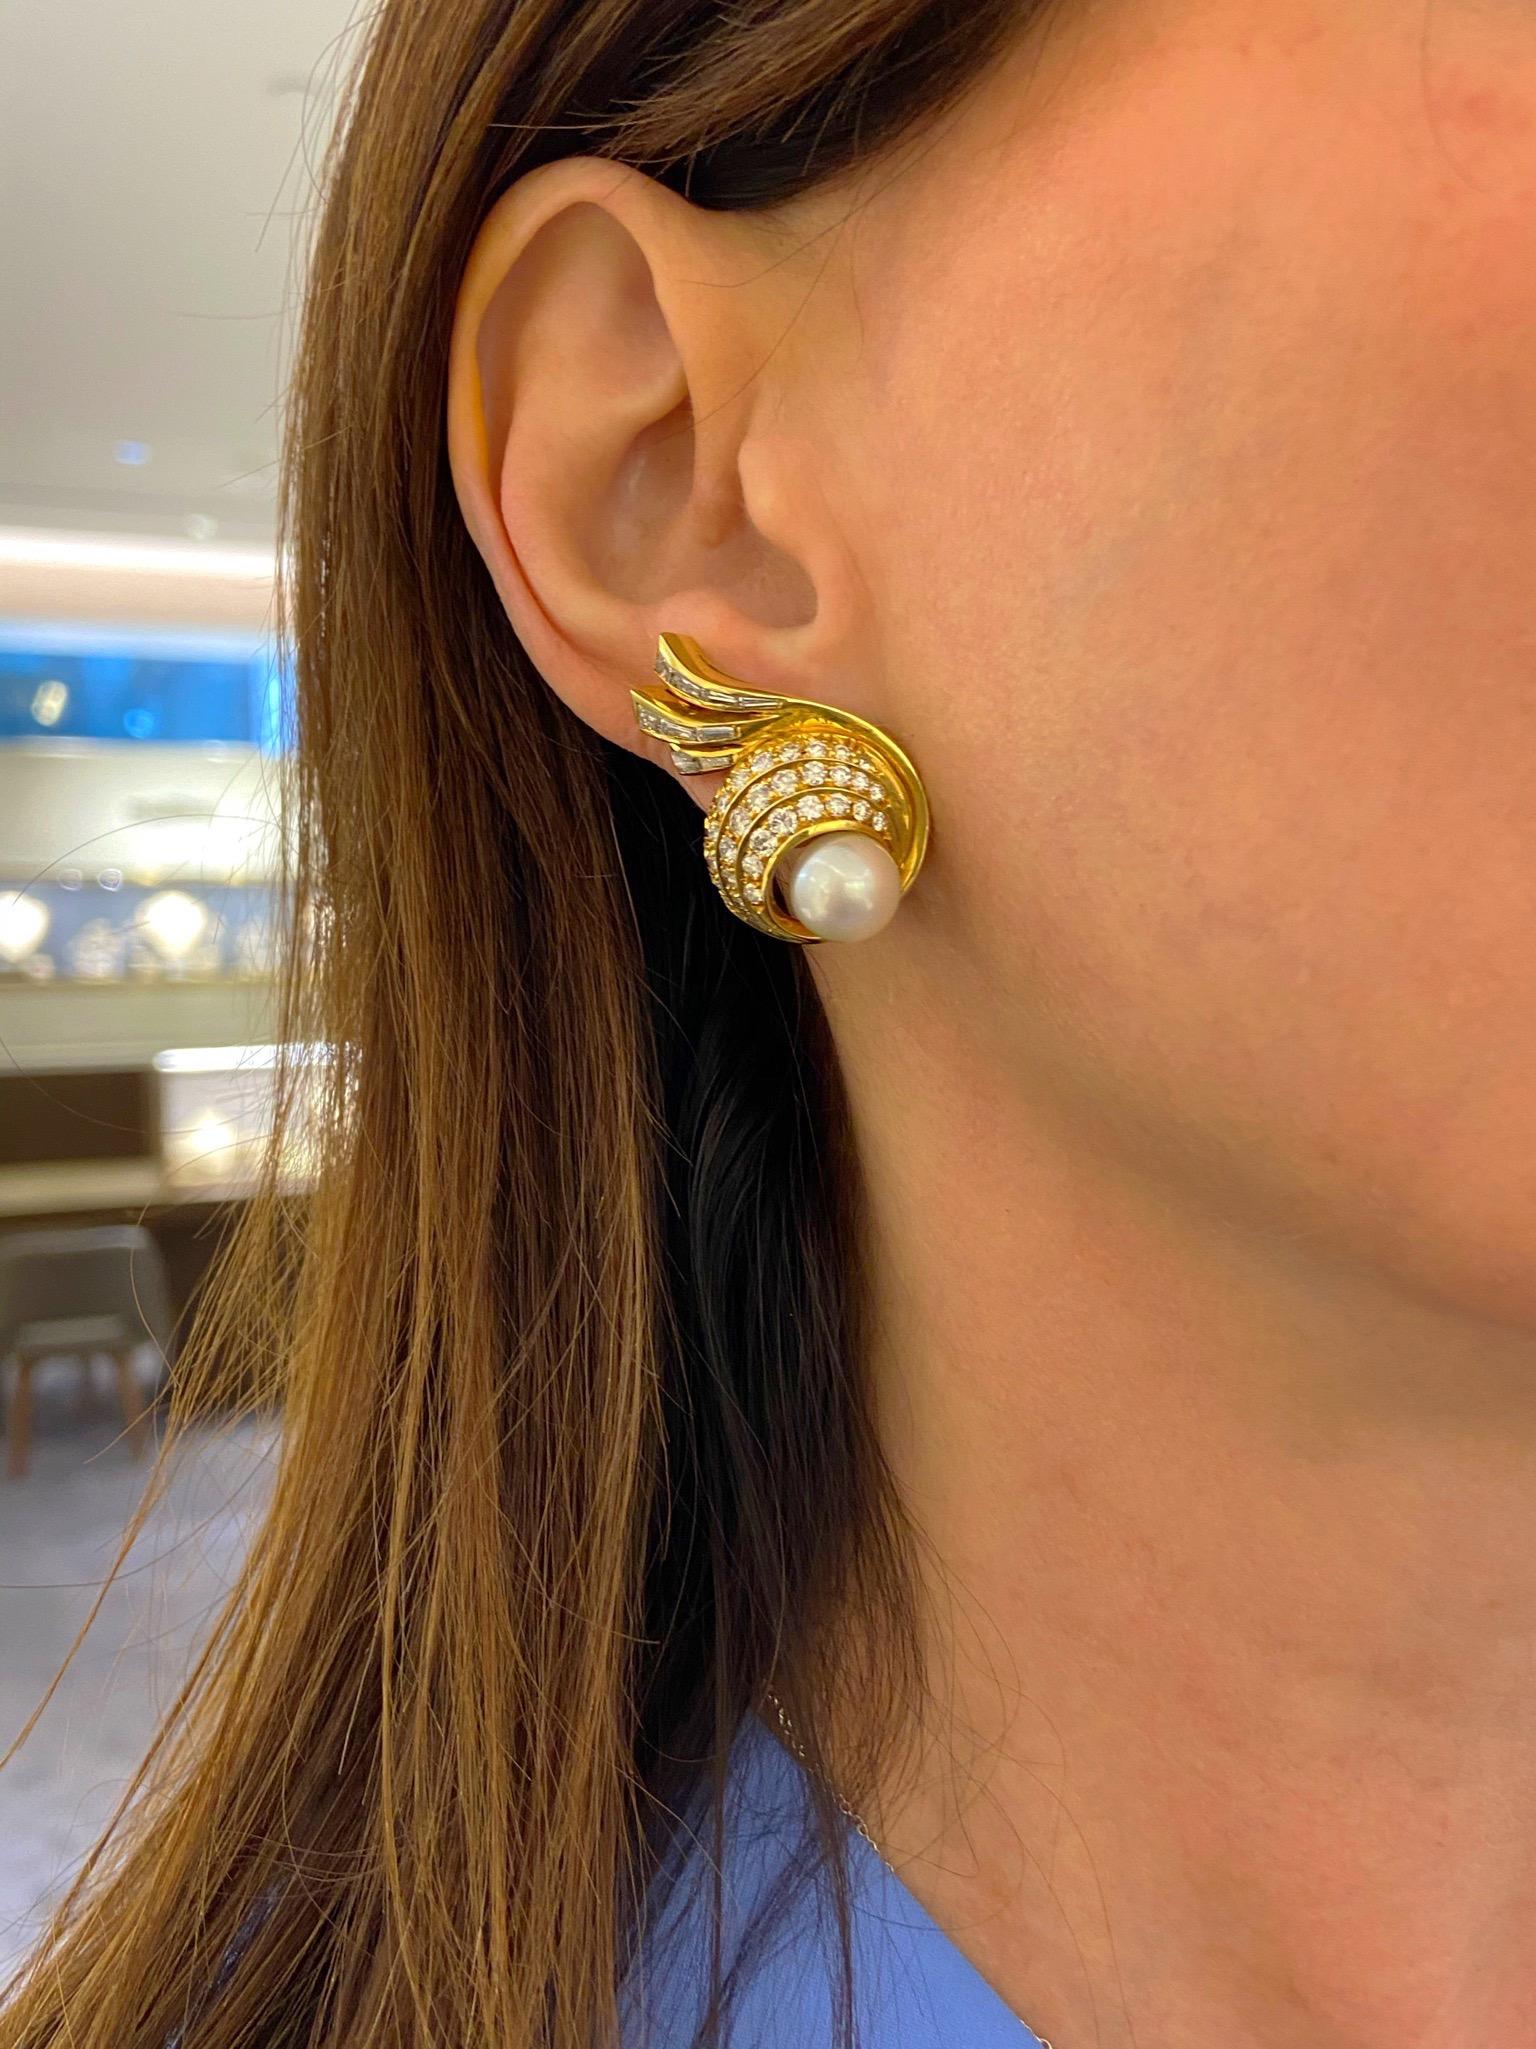 Cellini NYC 18 Karat Gold, Swirl Earrings with 4.06 Carat Diamonds and Pearls For Sale 2